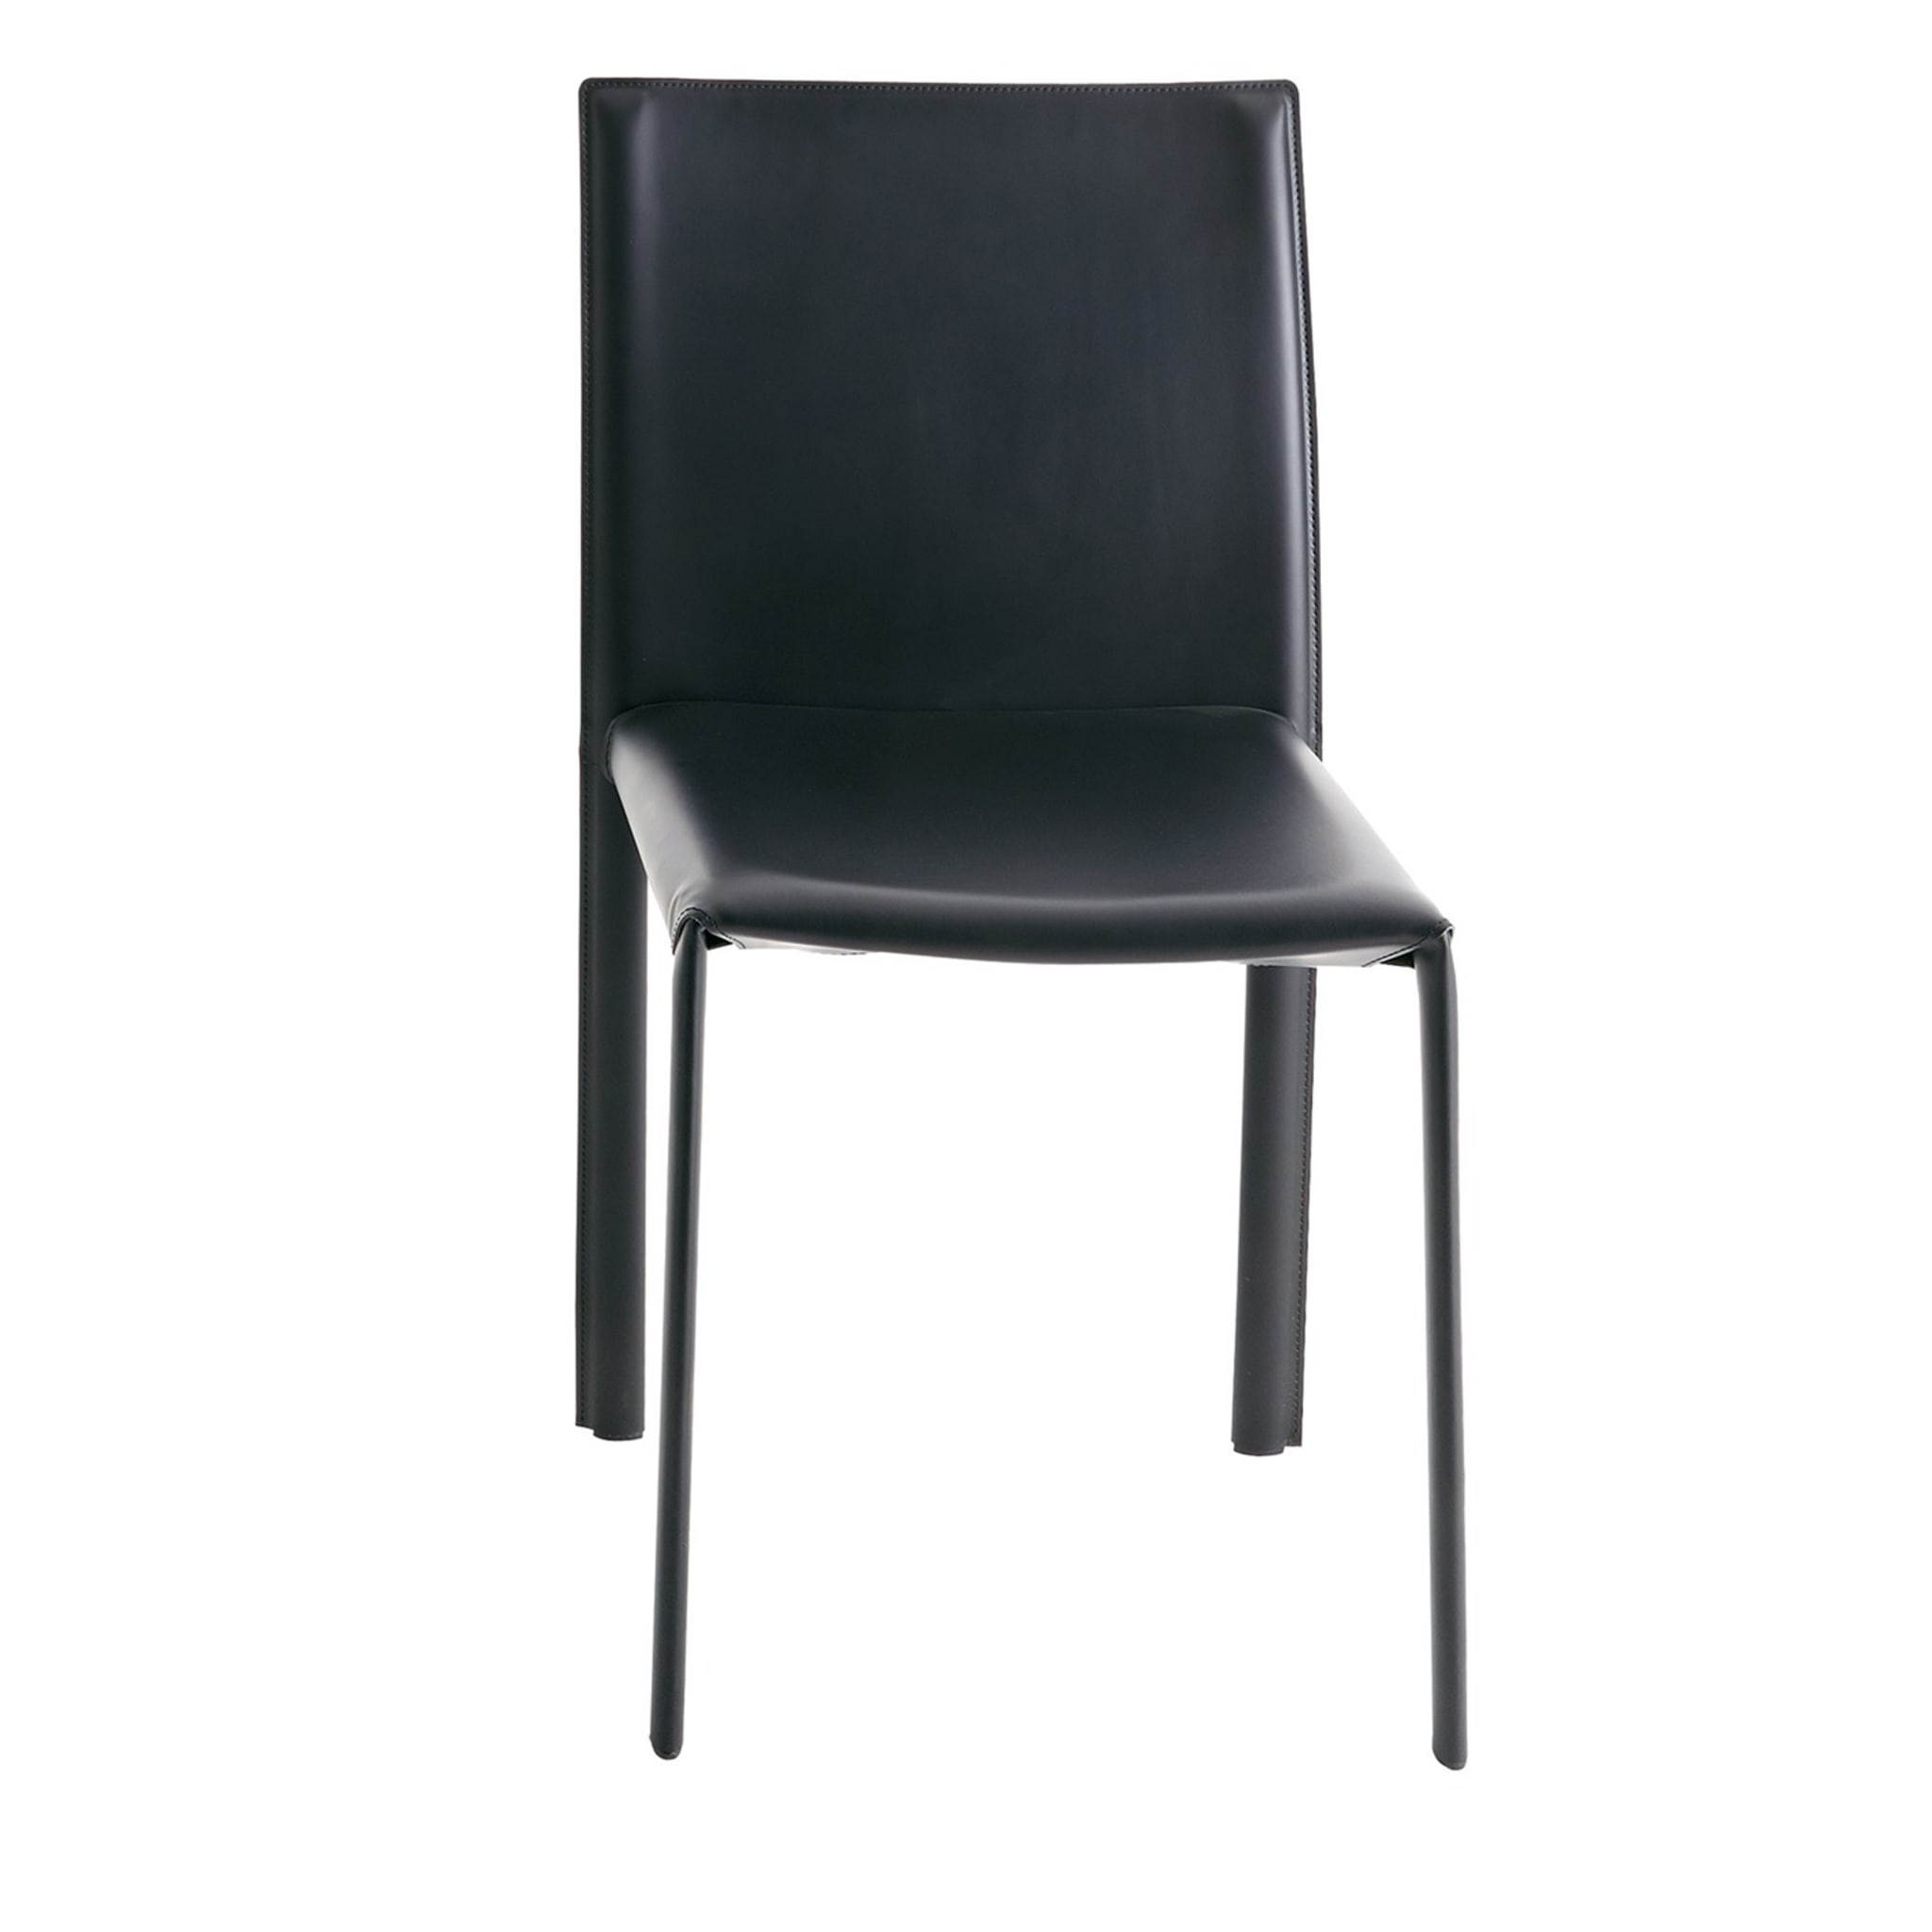 Dress Black Chair by W. Colico - Main view